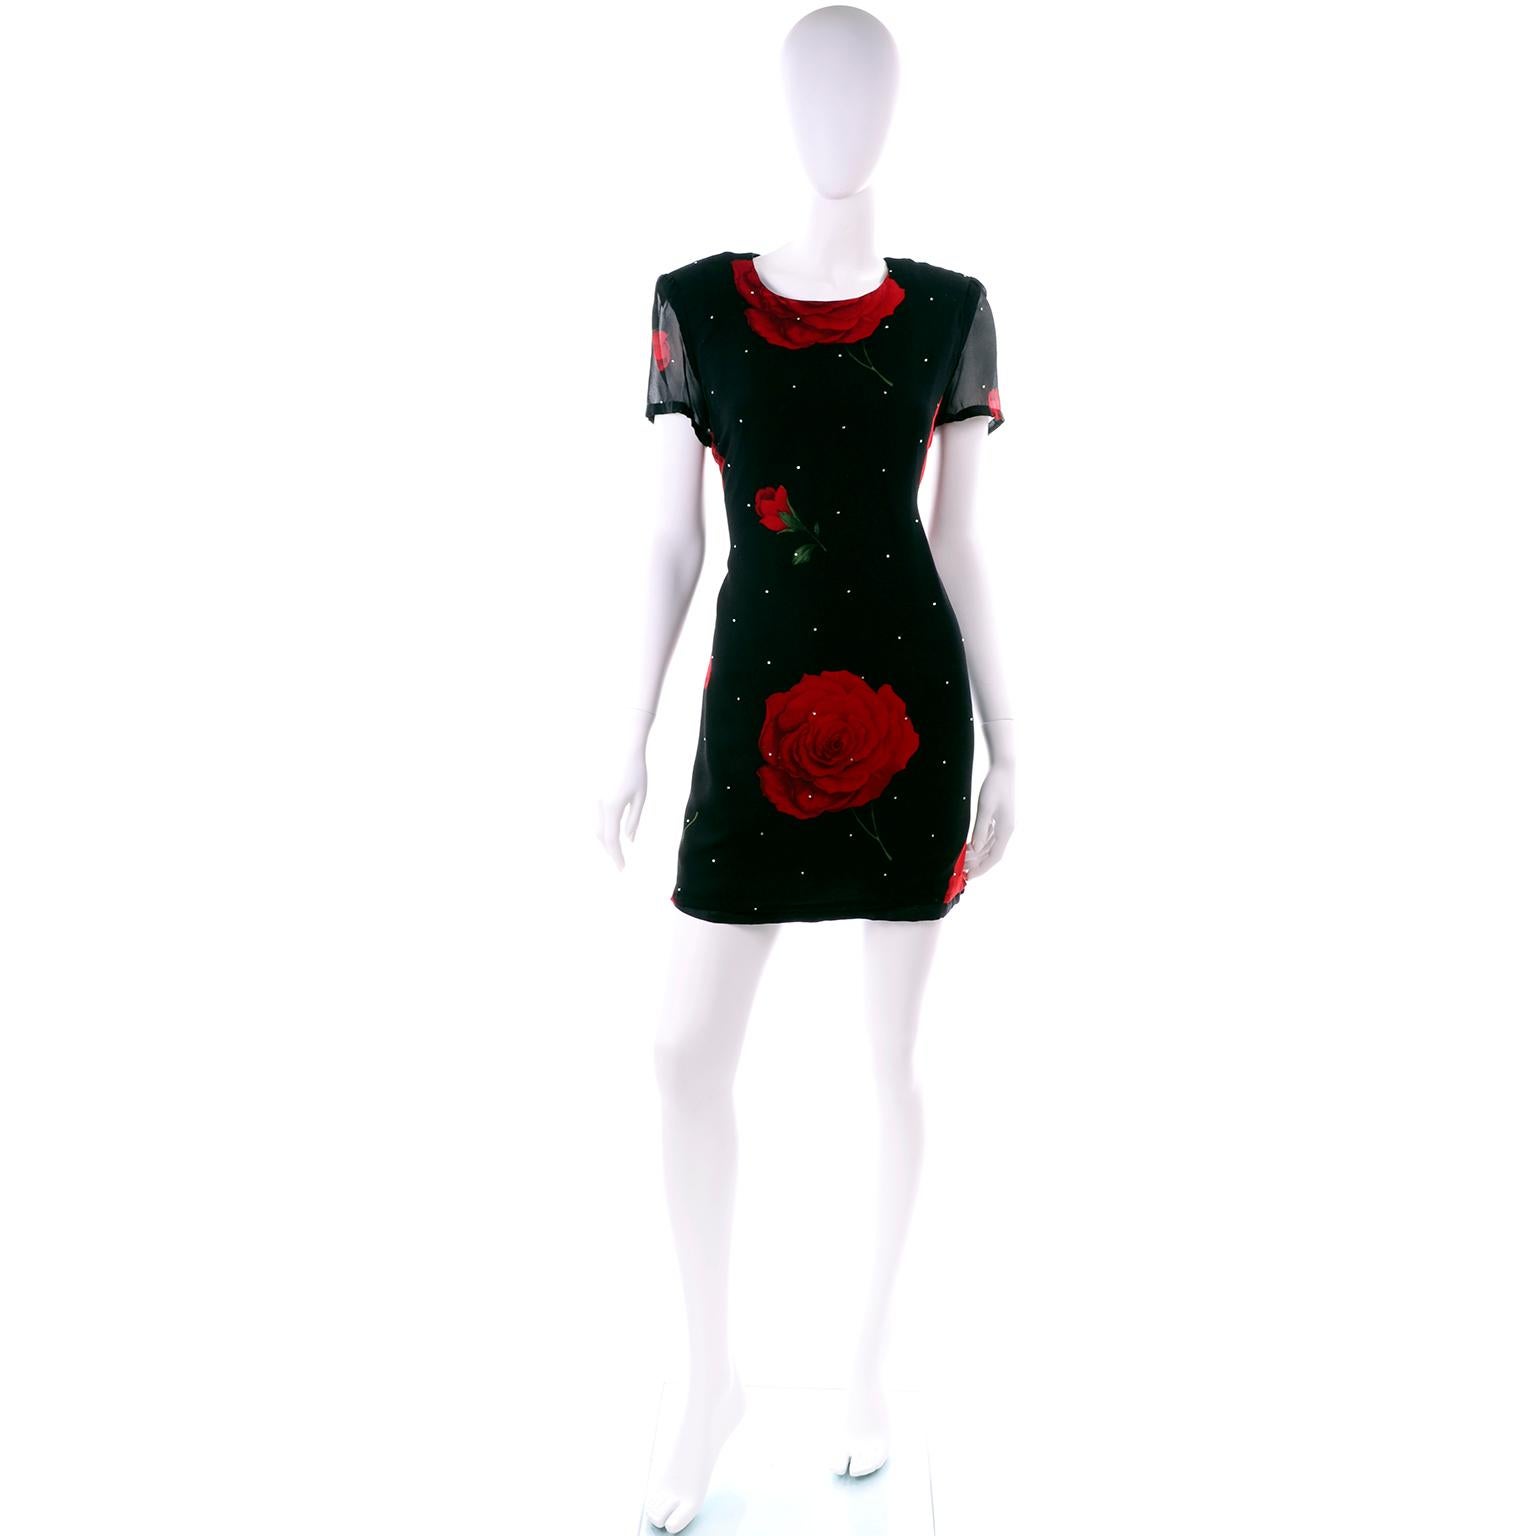 This is a vintage Richilene New York fully lined silk shift dress with sheer silk chiffon sleeves and tiny rhinestones. The dress is black with red roses and green leaves and it's a super easy to wear dress for a dinner party, cocktail party, or